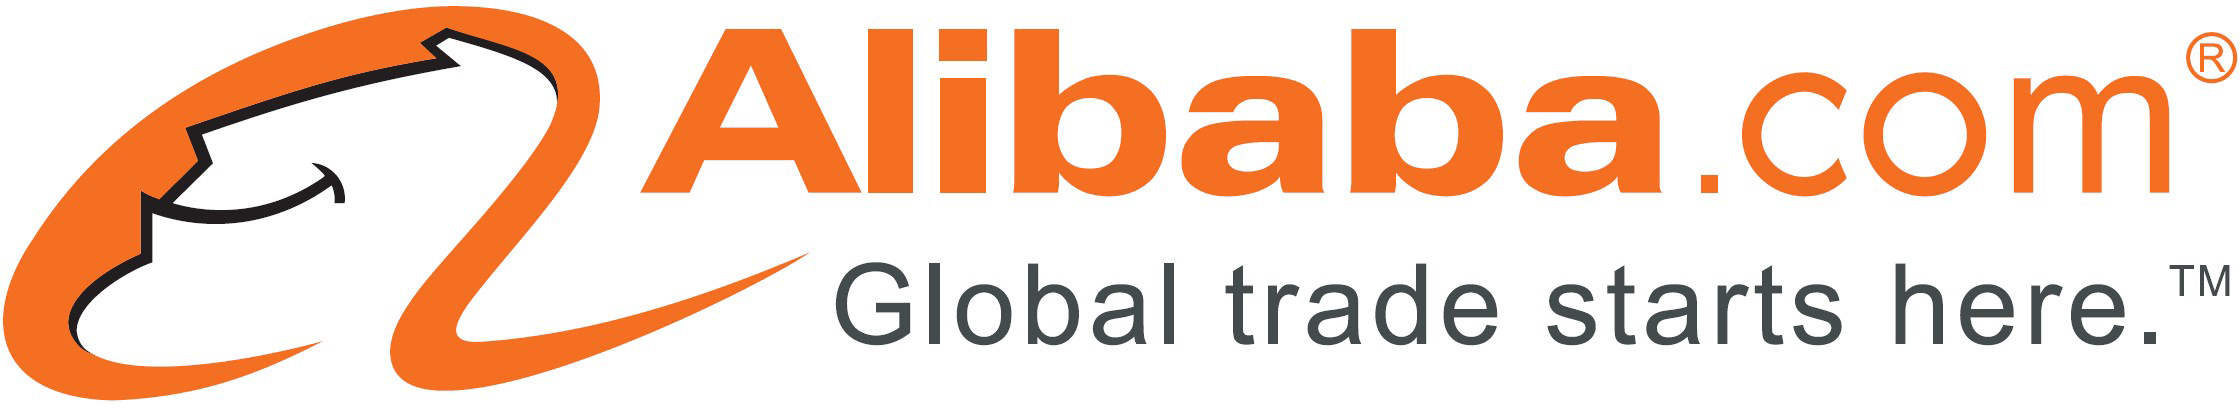 Alibaba-pictures-logo.png